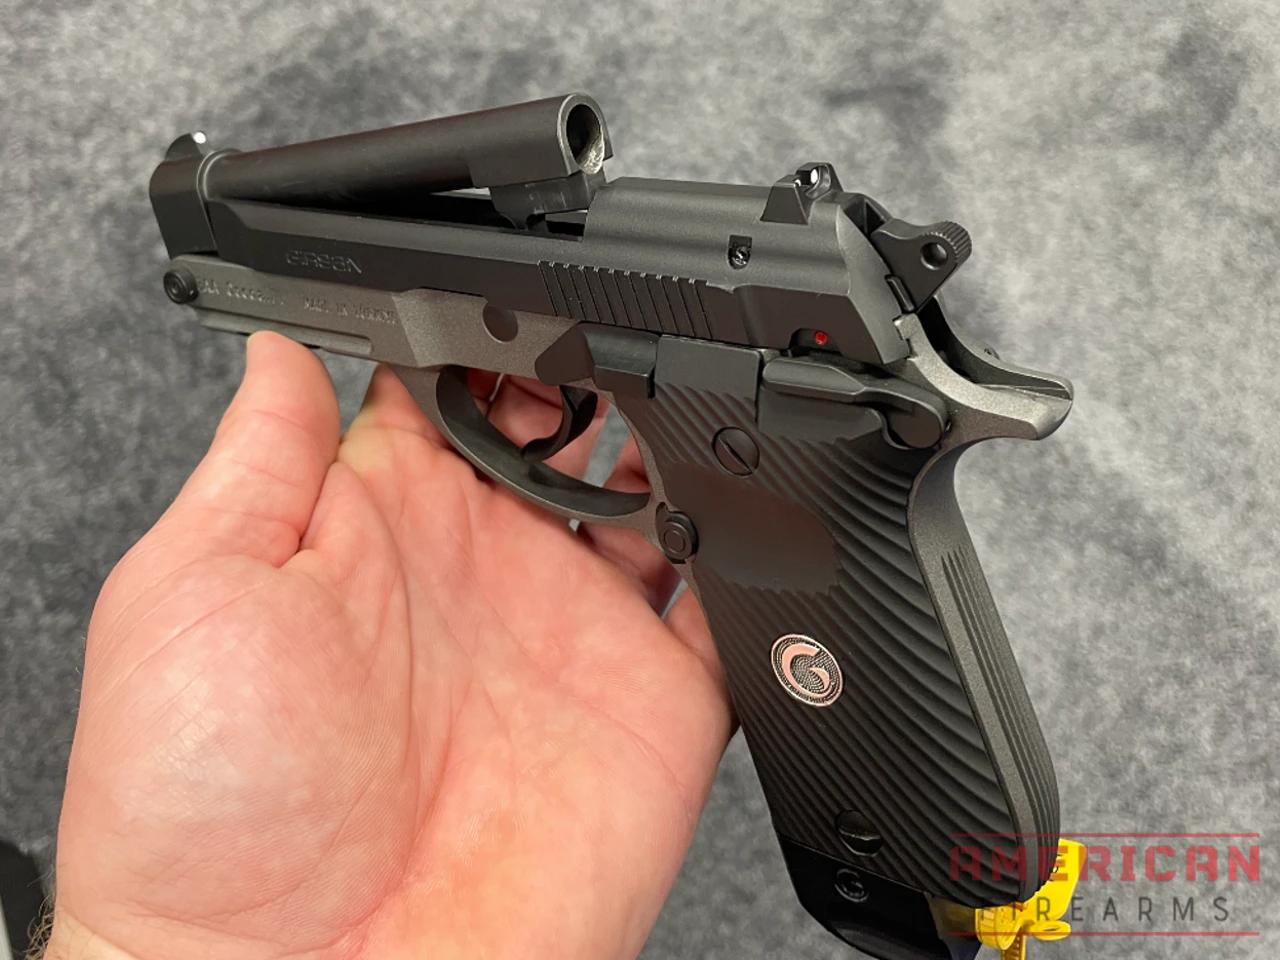 Girsan has taken the Beretta 80 series Cheetah 380 and added a tip-up barrel to it like the ones seen on the Beretta Bobcat .22/.25 and Tomcat .32.